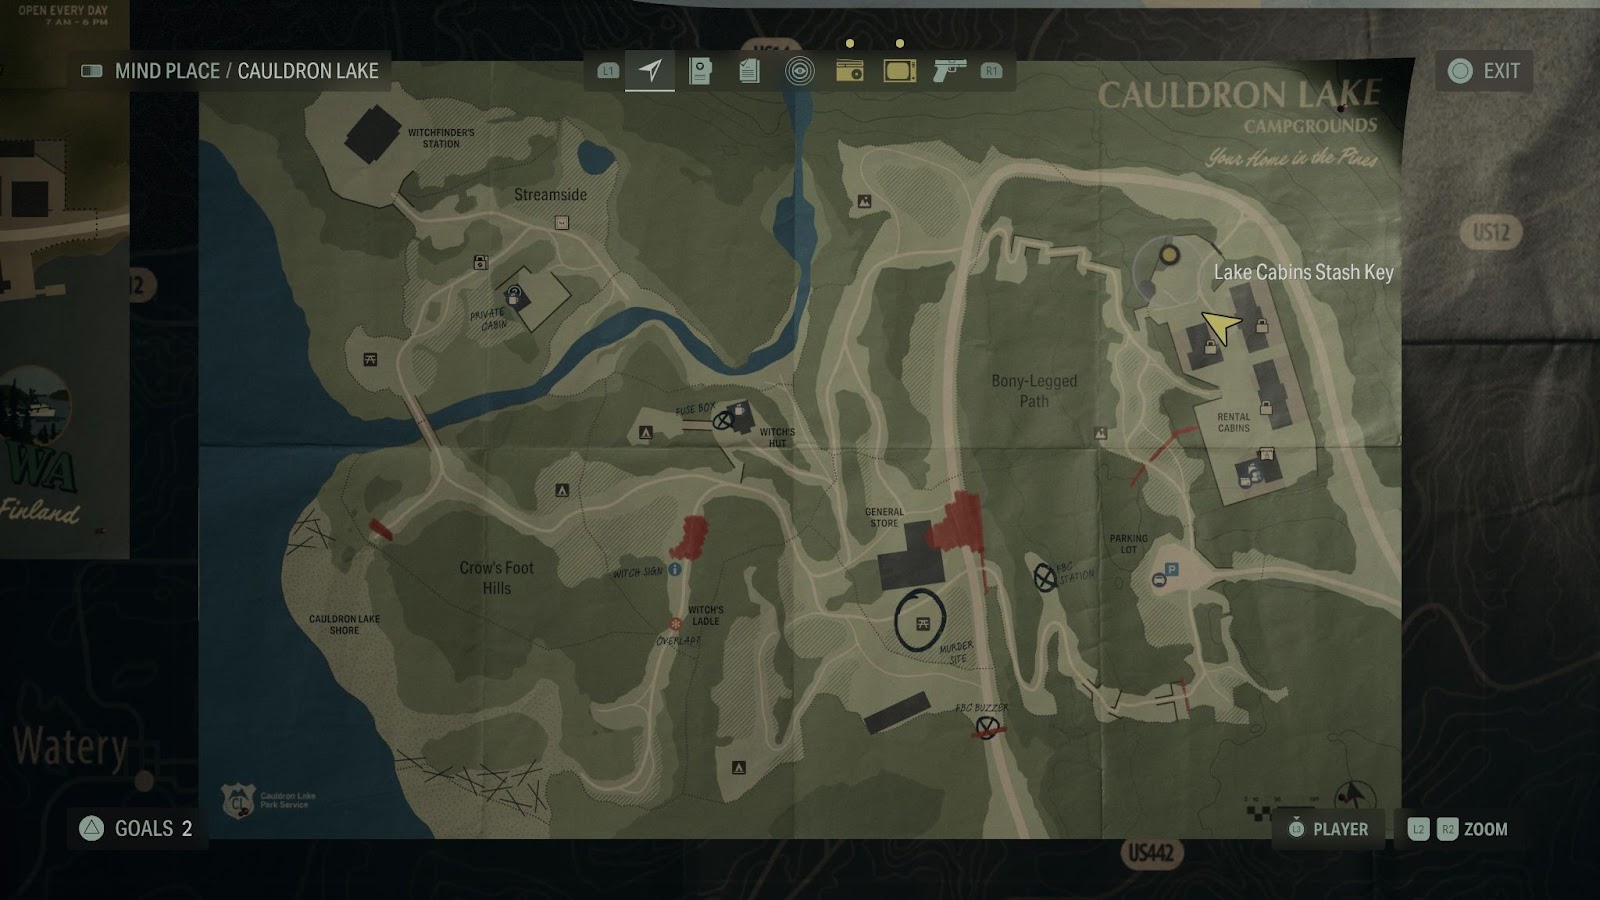 An in game screenshot of the cult stash key on the Cauldron Lake map from Alan Wake 2